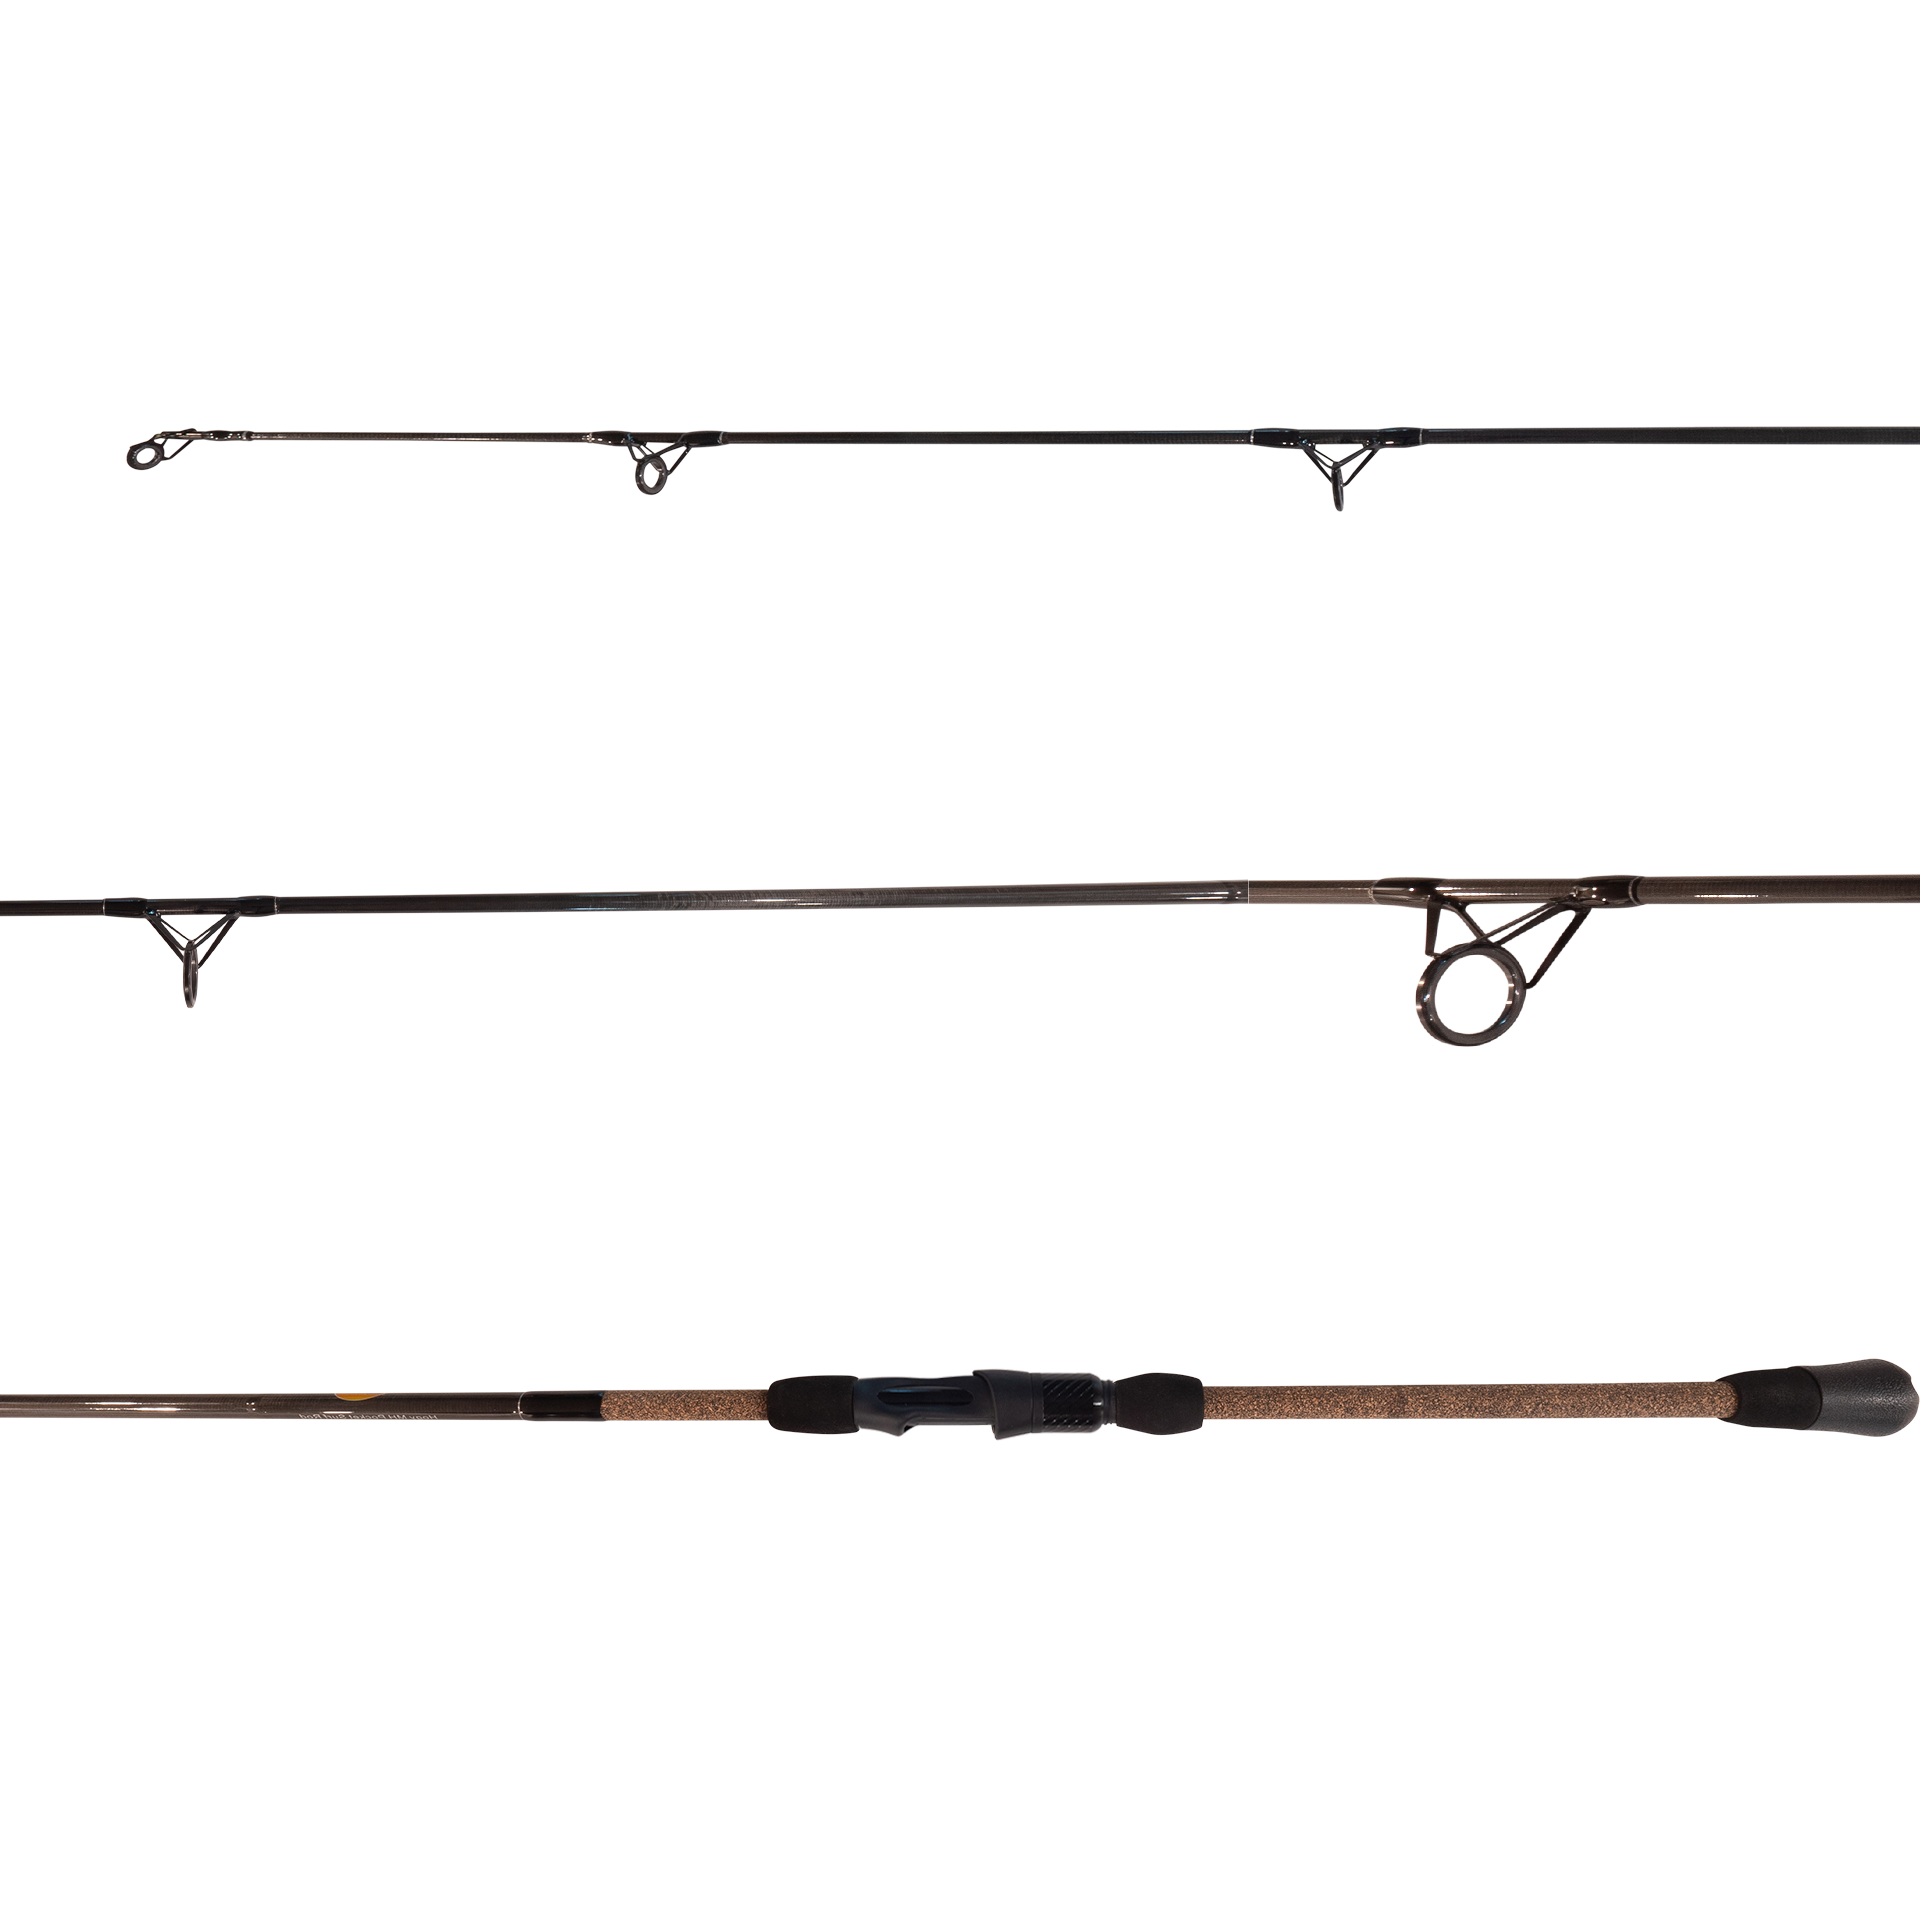 FTO Pre-Order Special: Pocket Surf Rod: Mod-Fast Action 7' MH (1oz - 2oz) (Ship Date By 5/15)